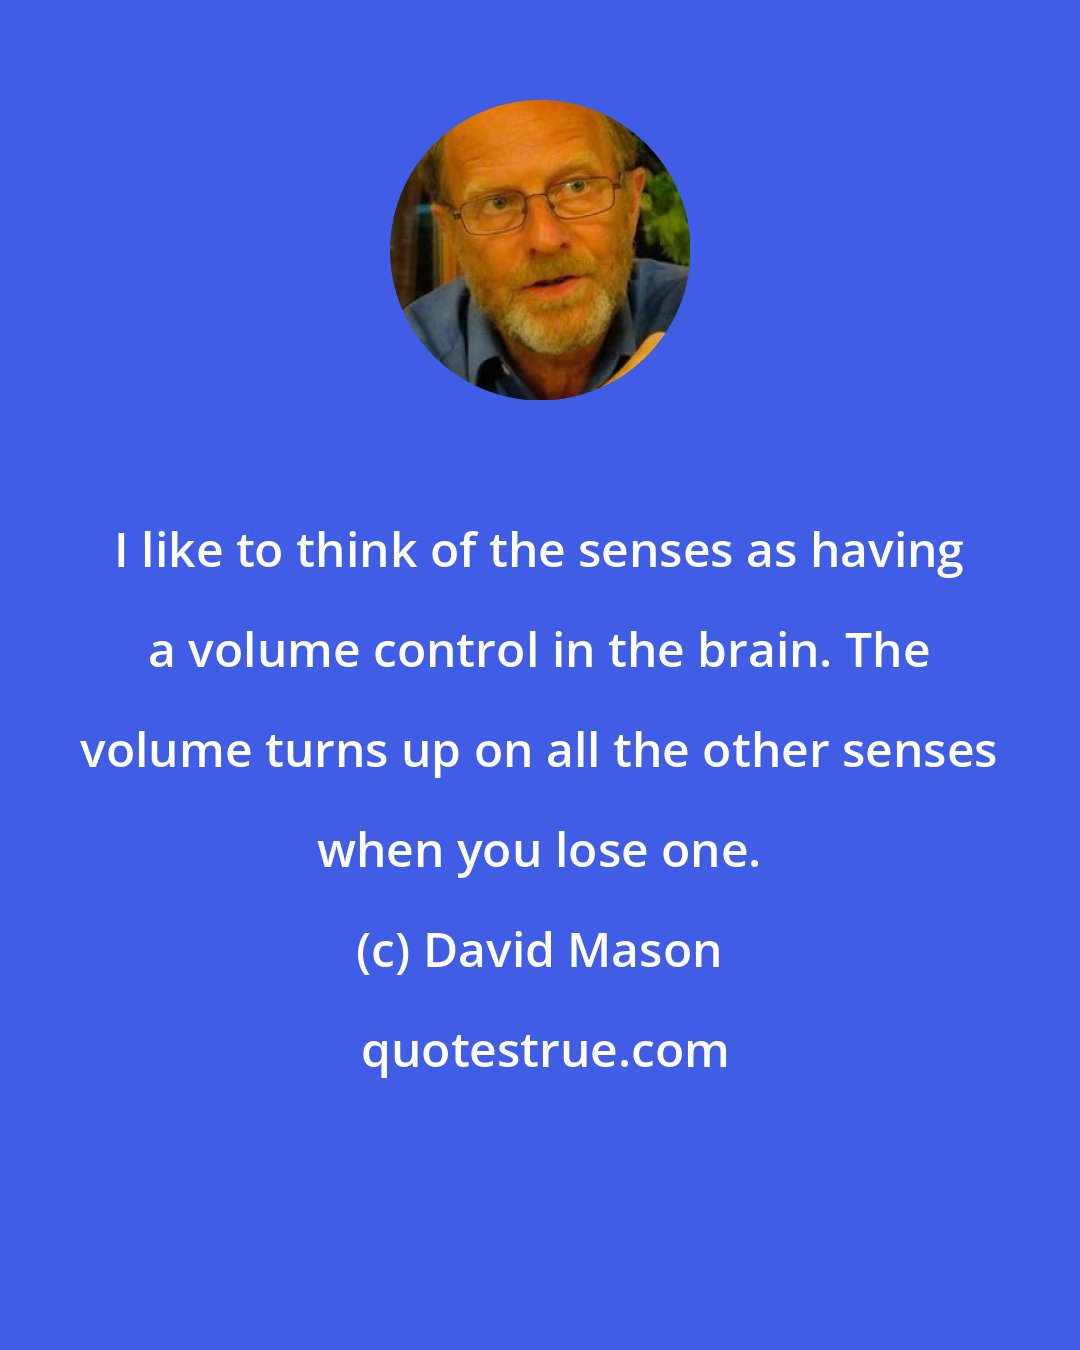 David Mason: I like to think of the senses as having a volume control in the brain. The volume turns up on all the other senses when you lose one.